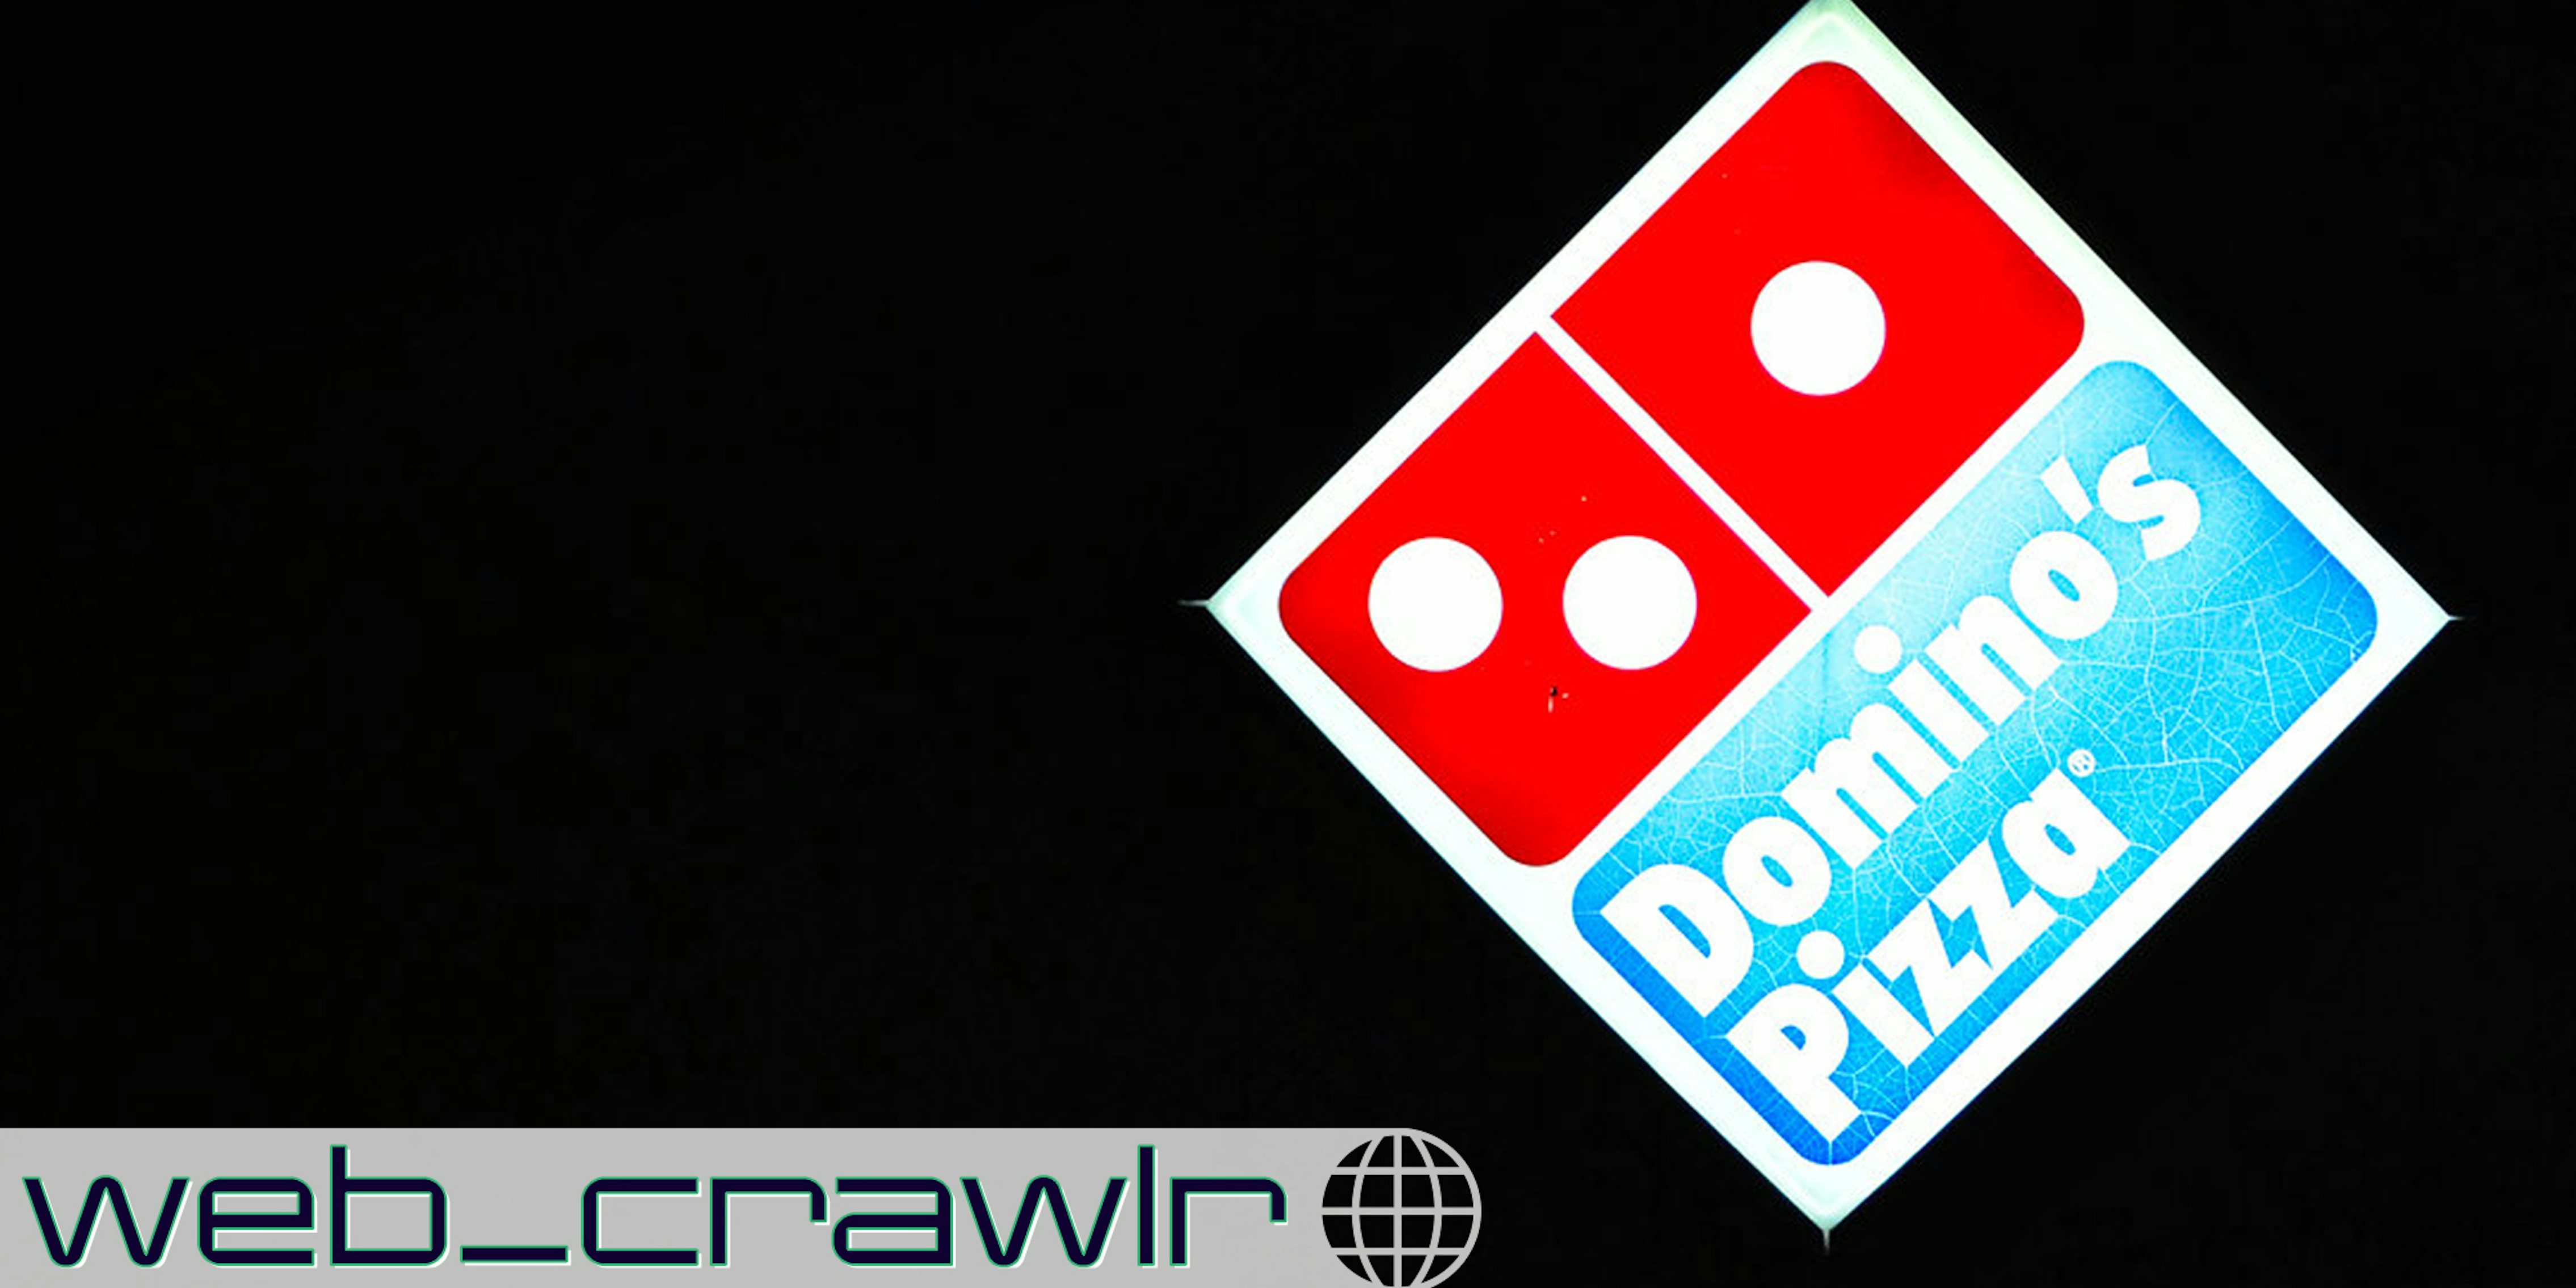 A Domino's pizza sign at night. The Daily Dot newsletter web_crawlr logo is in the bottom left corner.